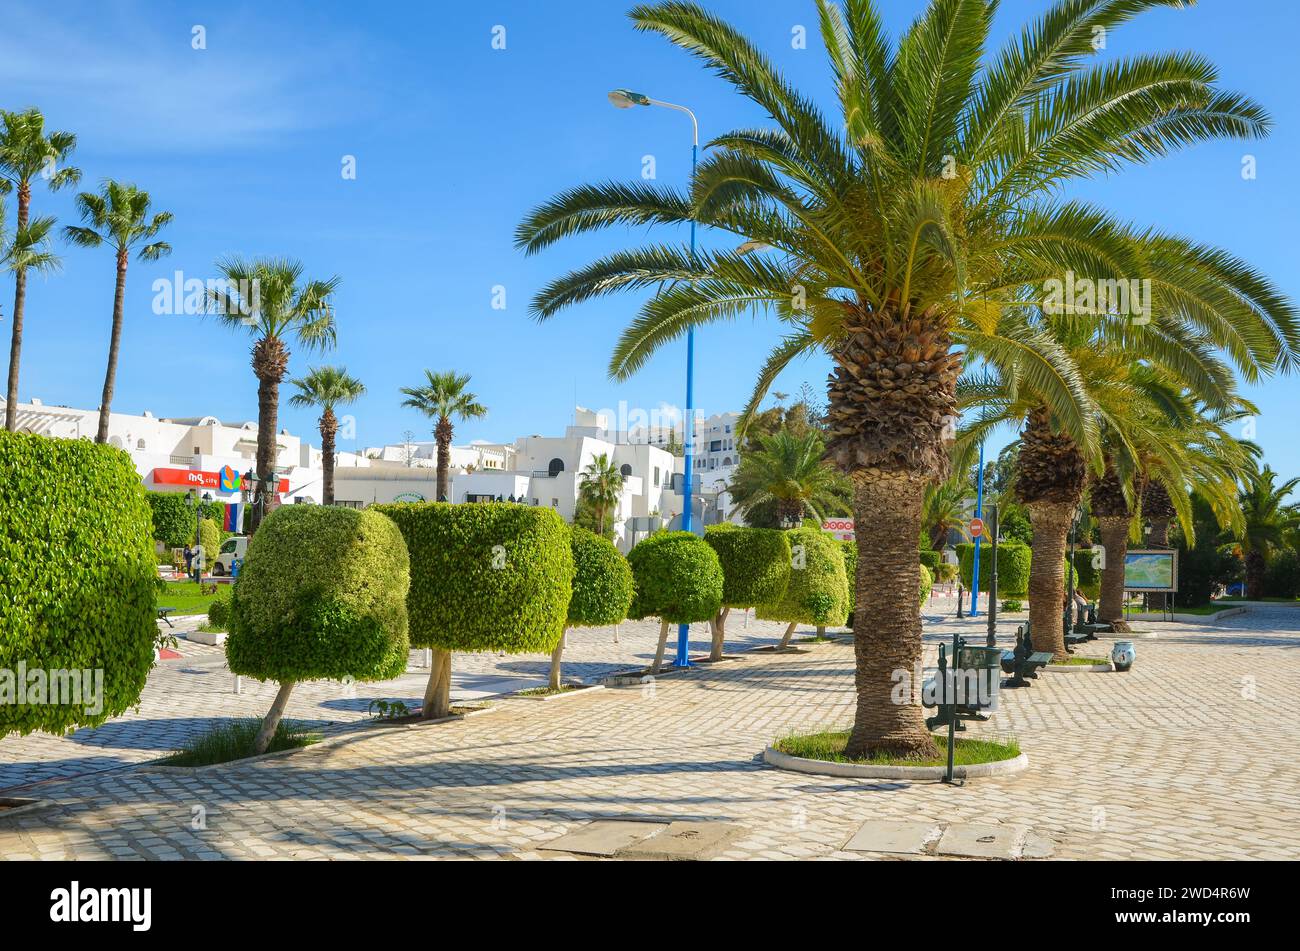 Port El Kantaoui, Sousse, Tunisia. The main square in front of the gate leading to the marina. Stock Photo